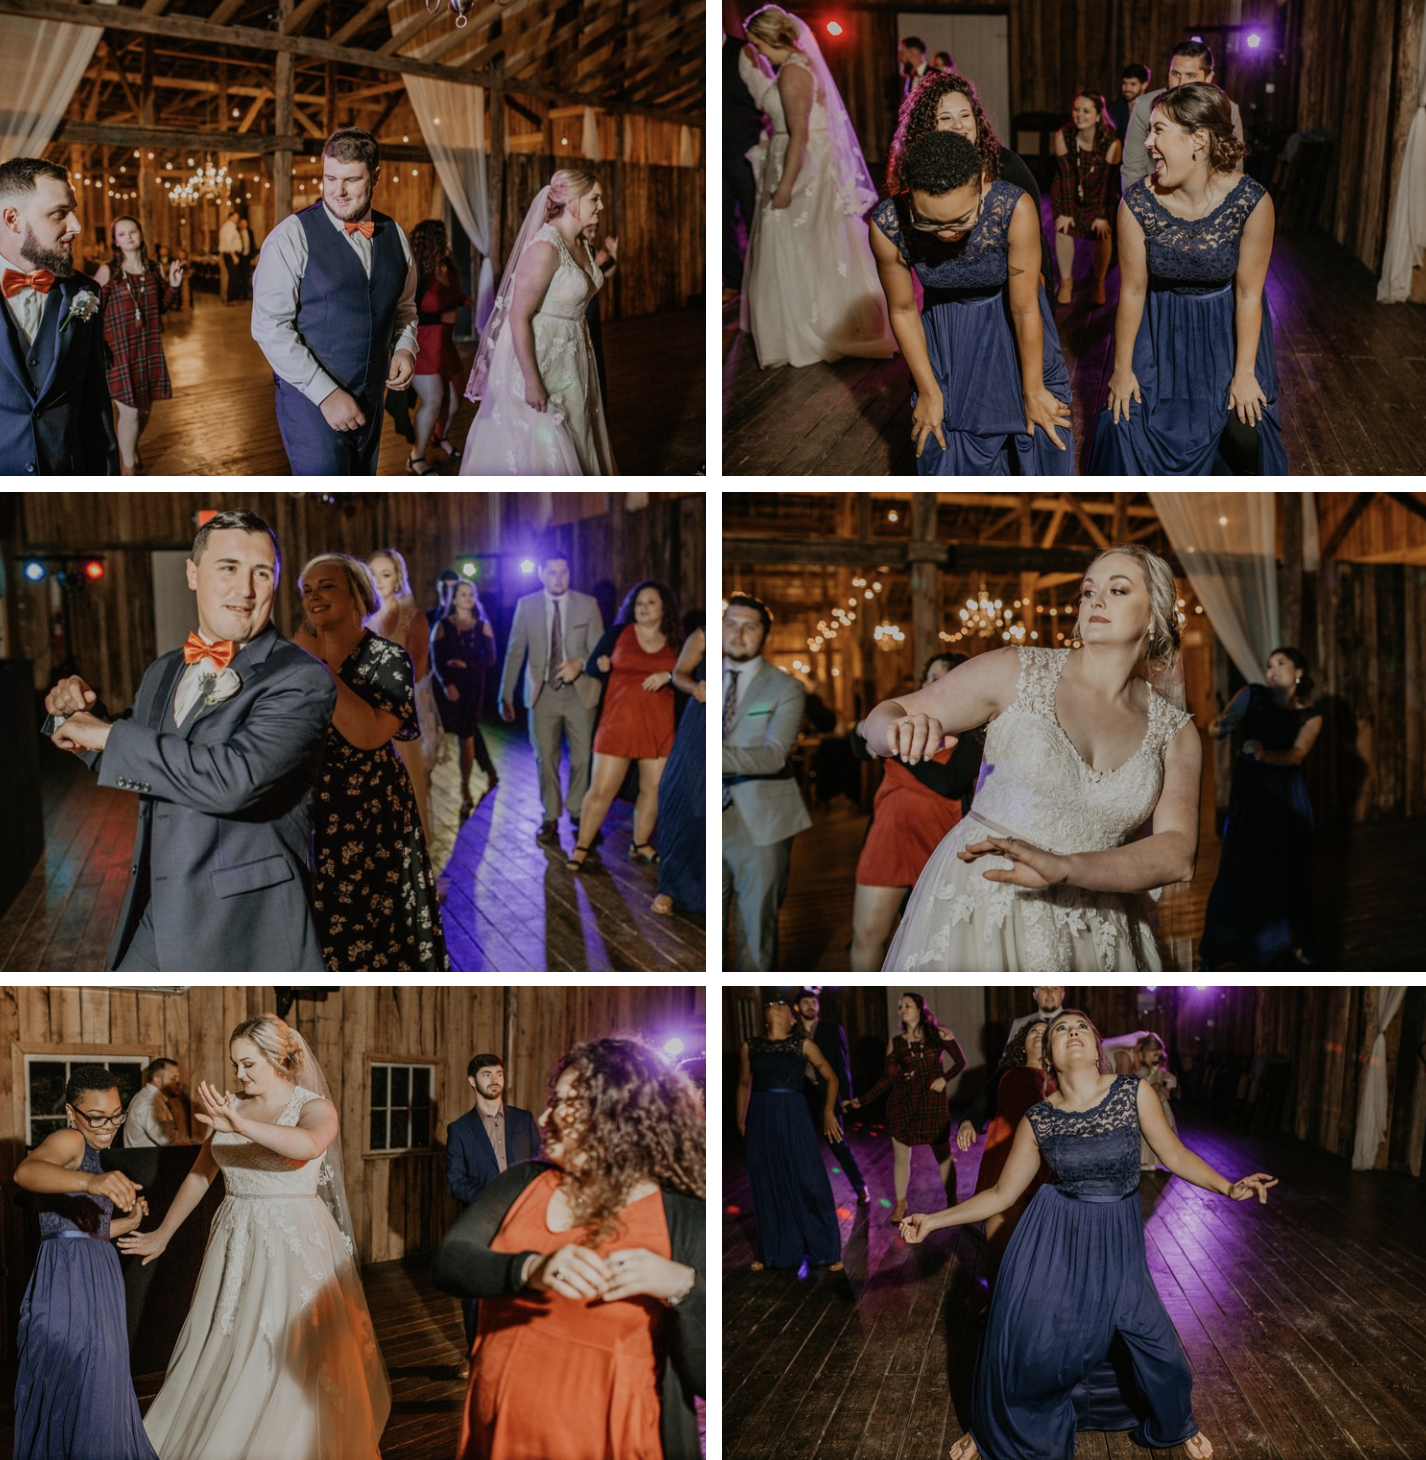 Nathan and Emily's reception at their wedding at meadow hill farm was lit.